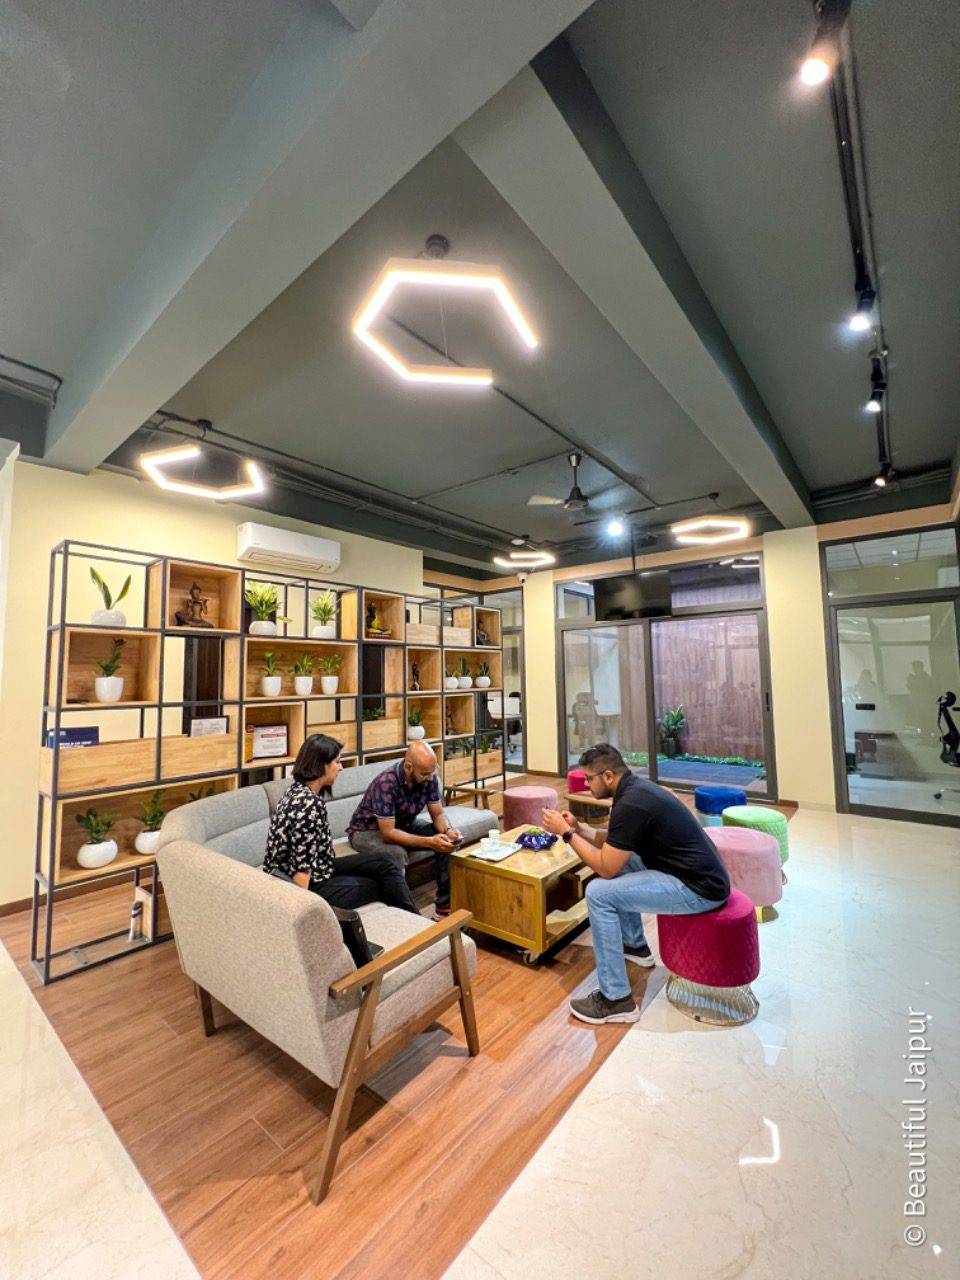 Key learnings from visiting the coworking spaces